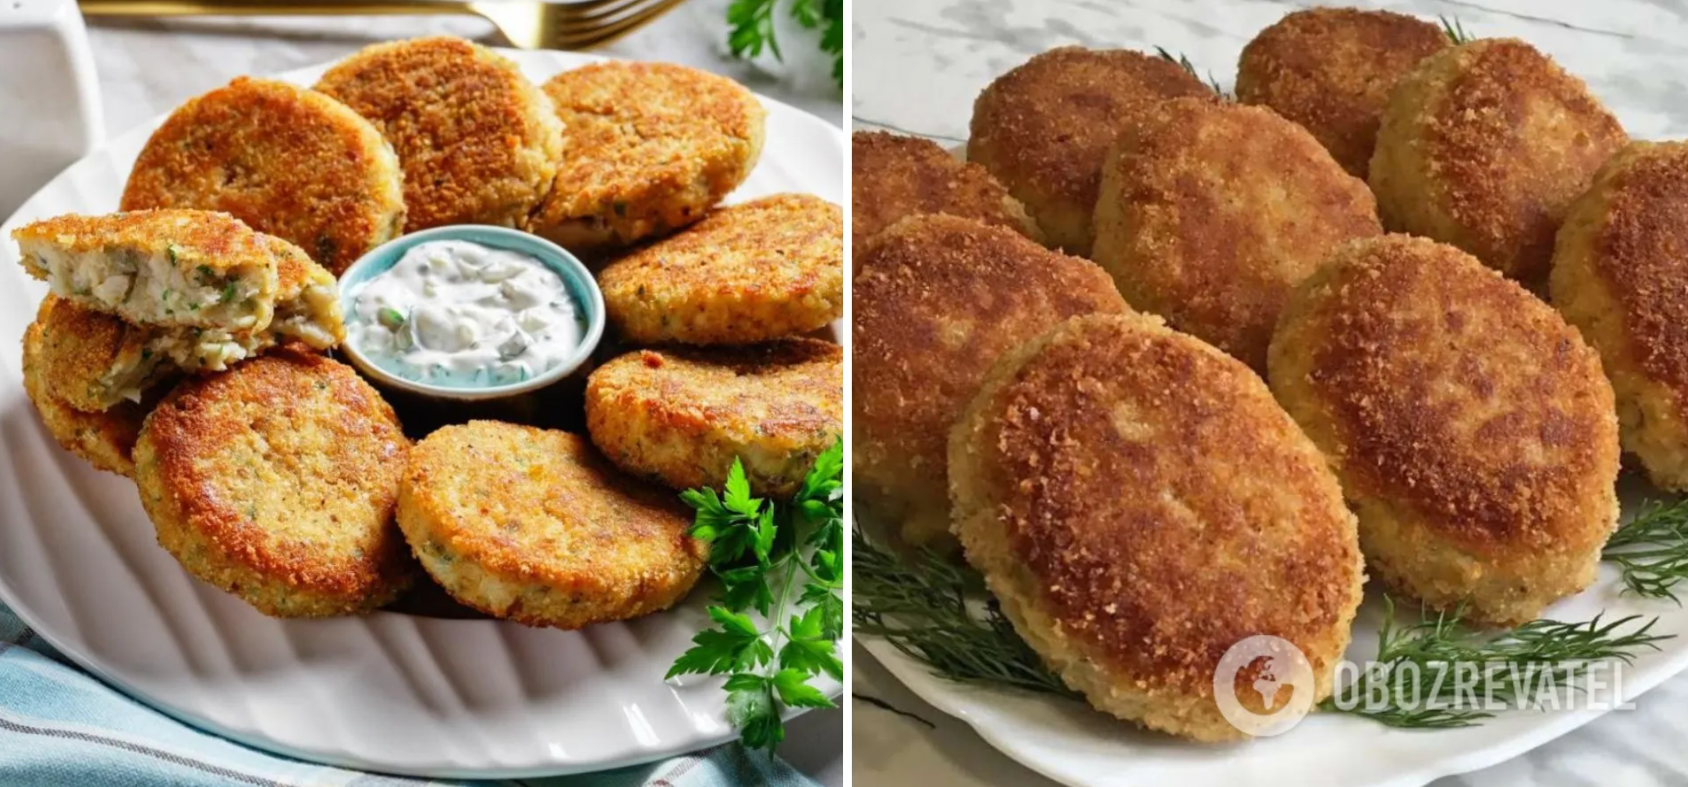 Cutlets with bread